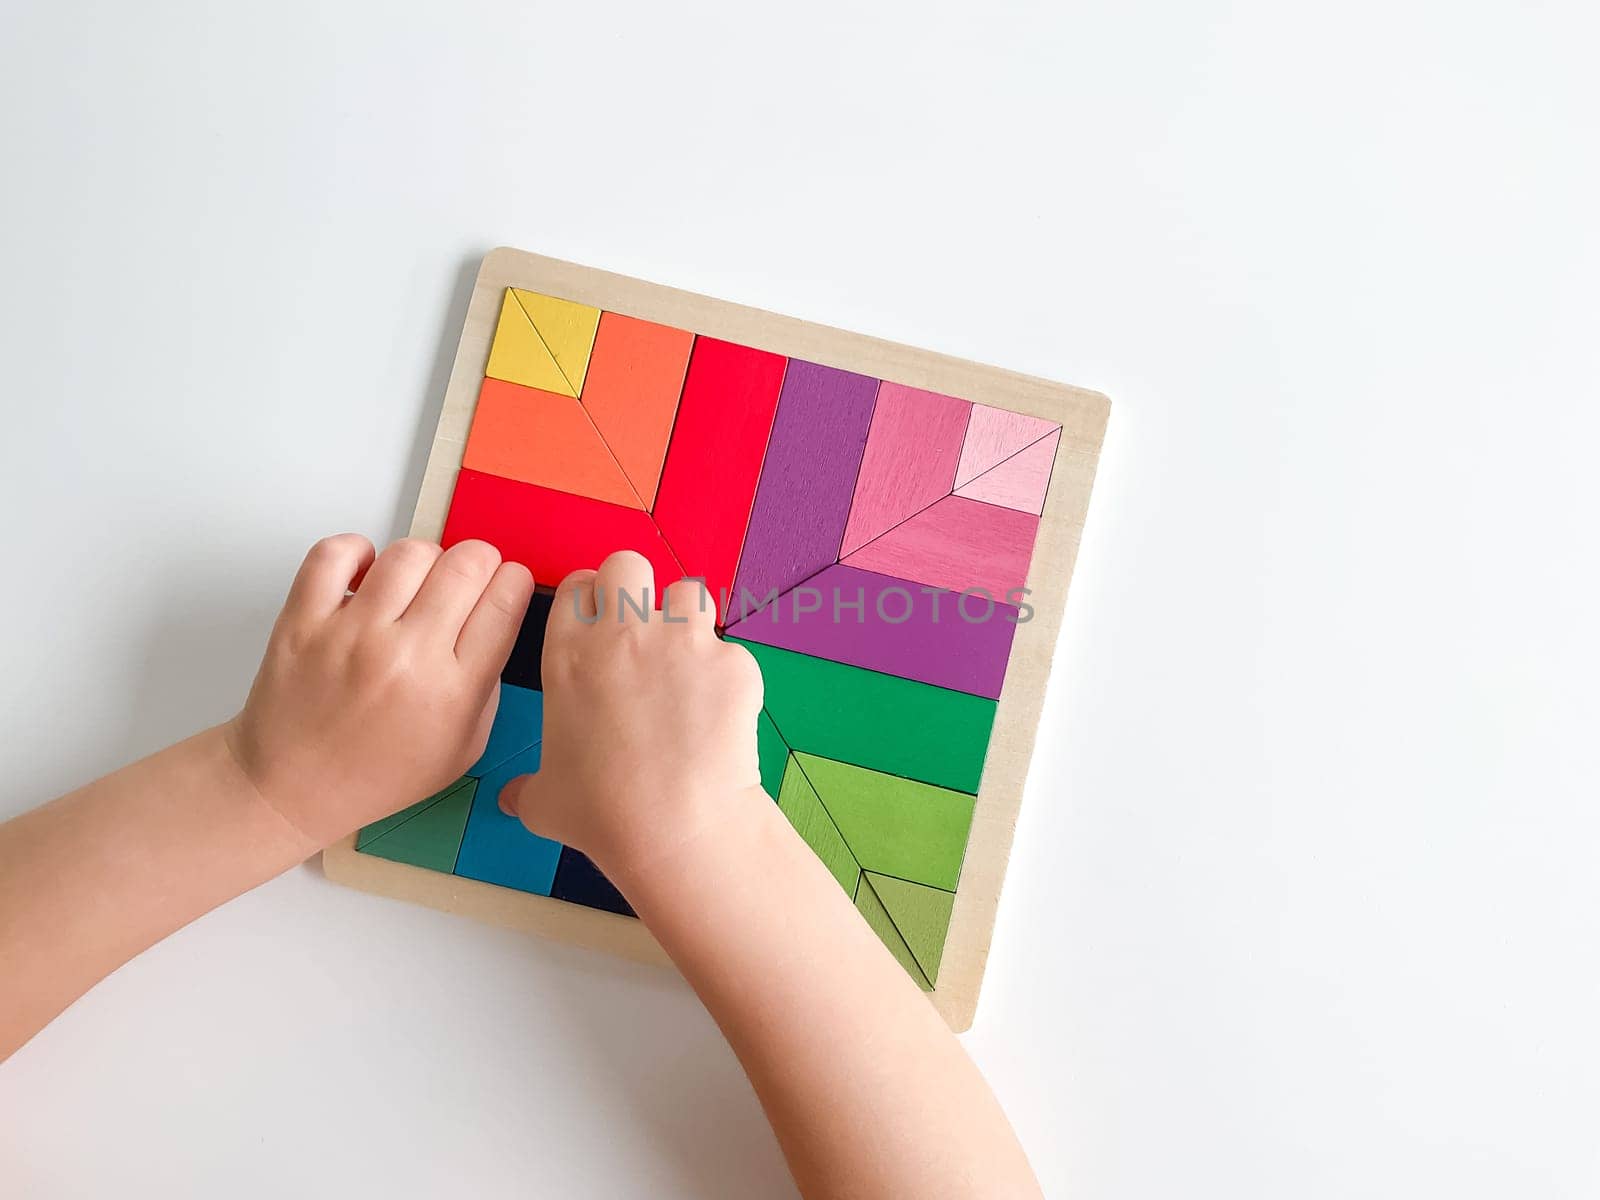 child's hand collects multicolored wooden mosaic on white background. child solves a colorful tangram. square of colorful geometric shapes on white background.